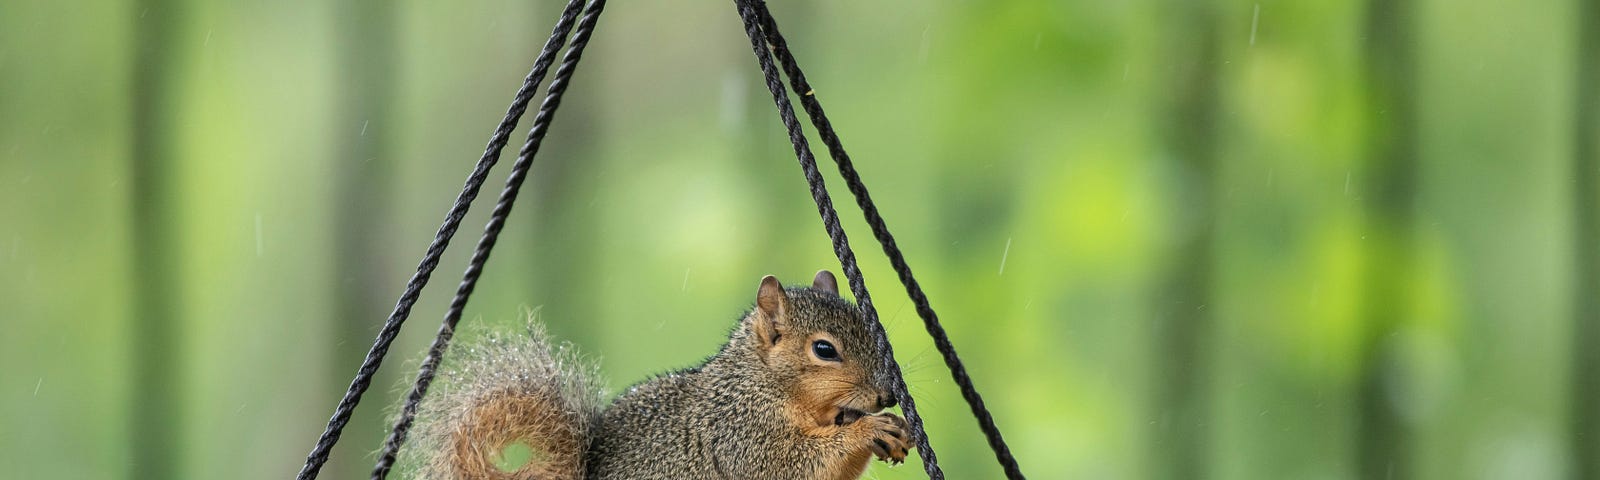 A squirrel sitting and eating bird seed in an open hanging feeder